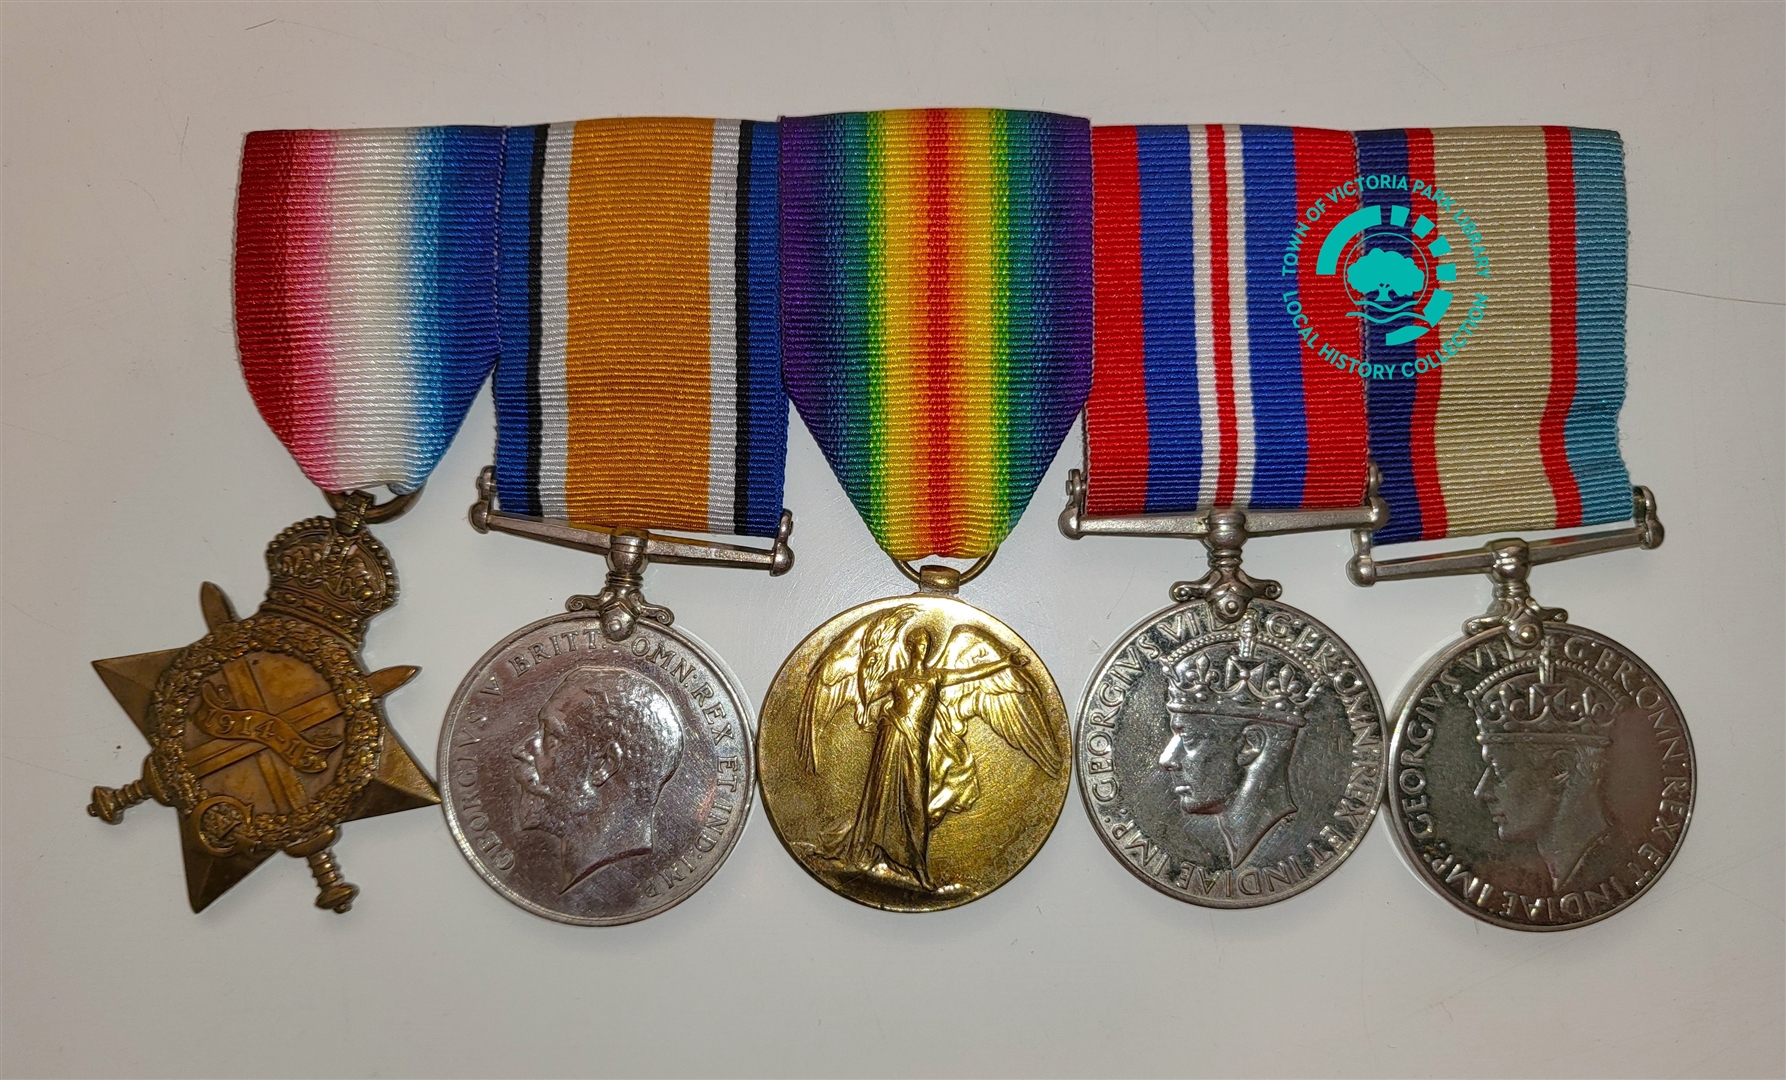 PH00050-14 Martin John Healy’s WWI and WWII Medals Image